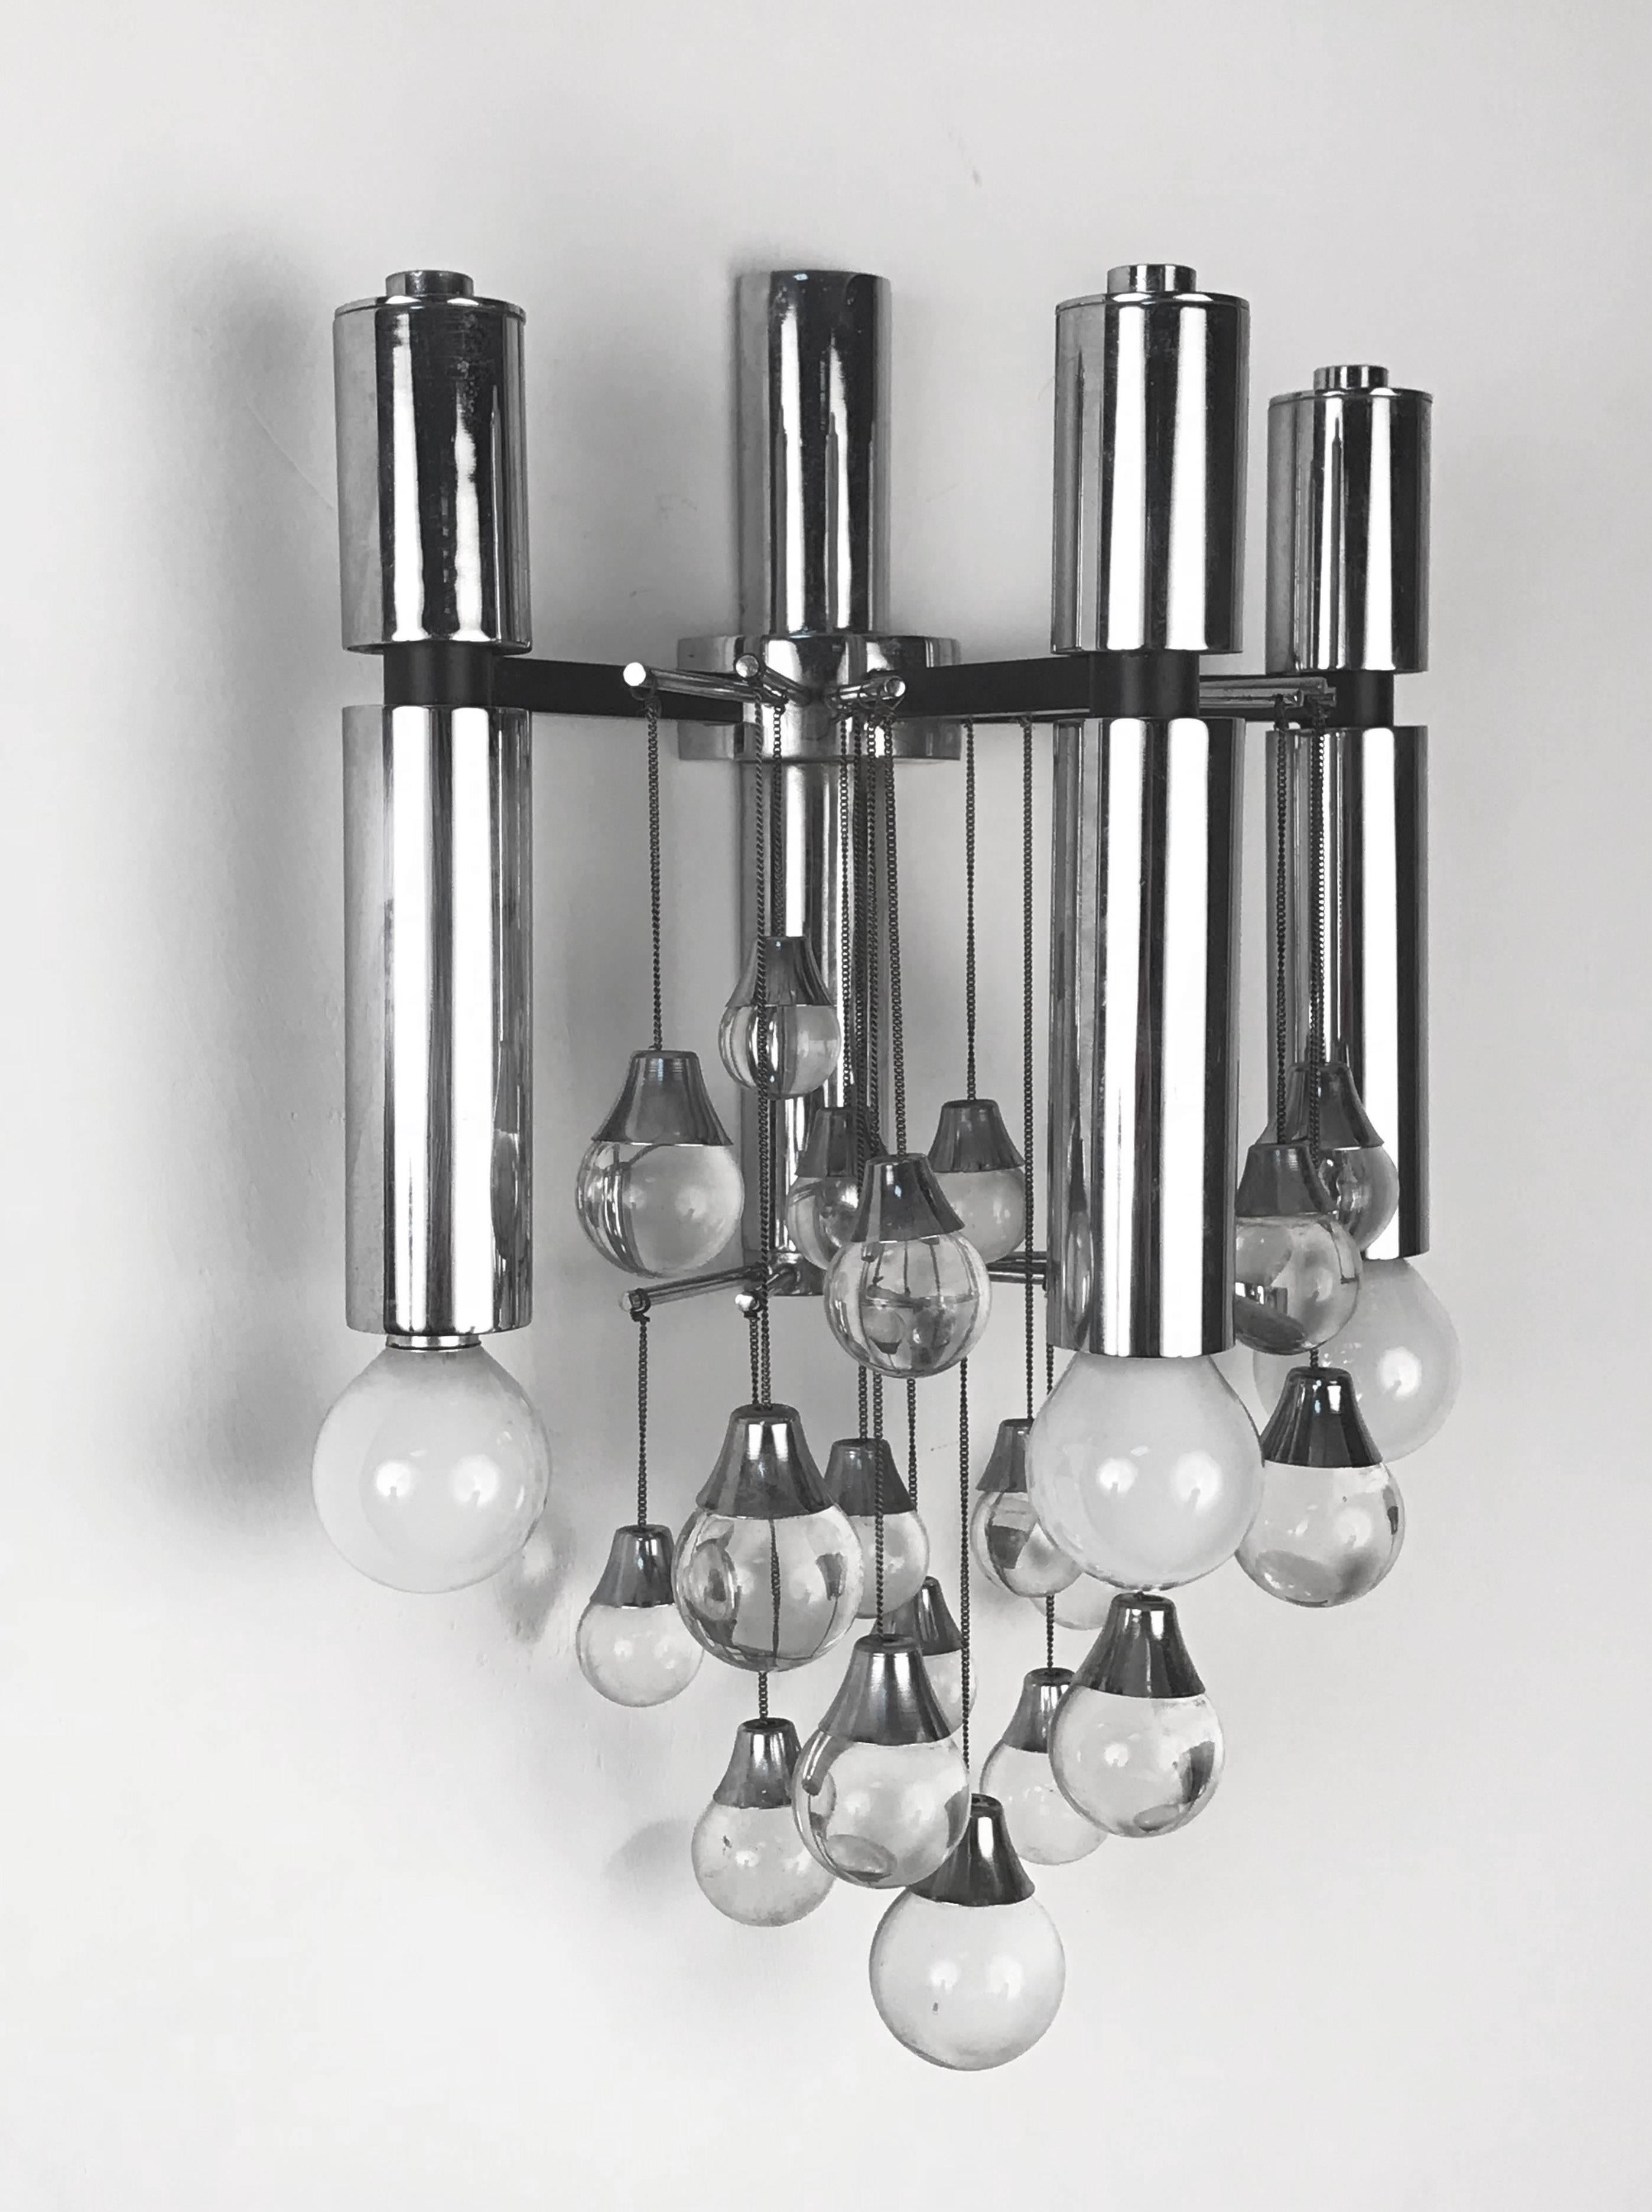 Pair of Sciolari Chrome and Glass Italian Sconces with Three Lights, 1960s For Sale 6